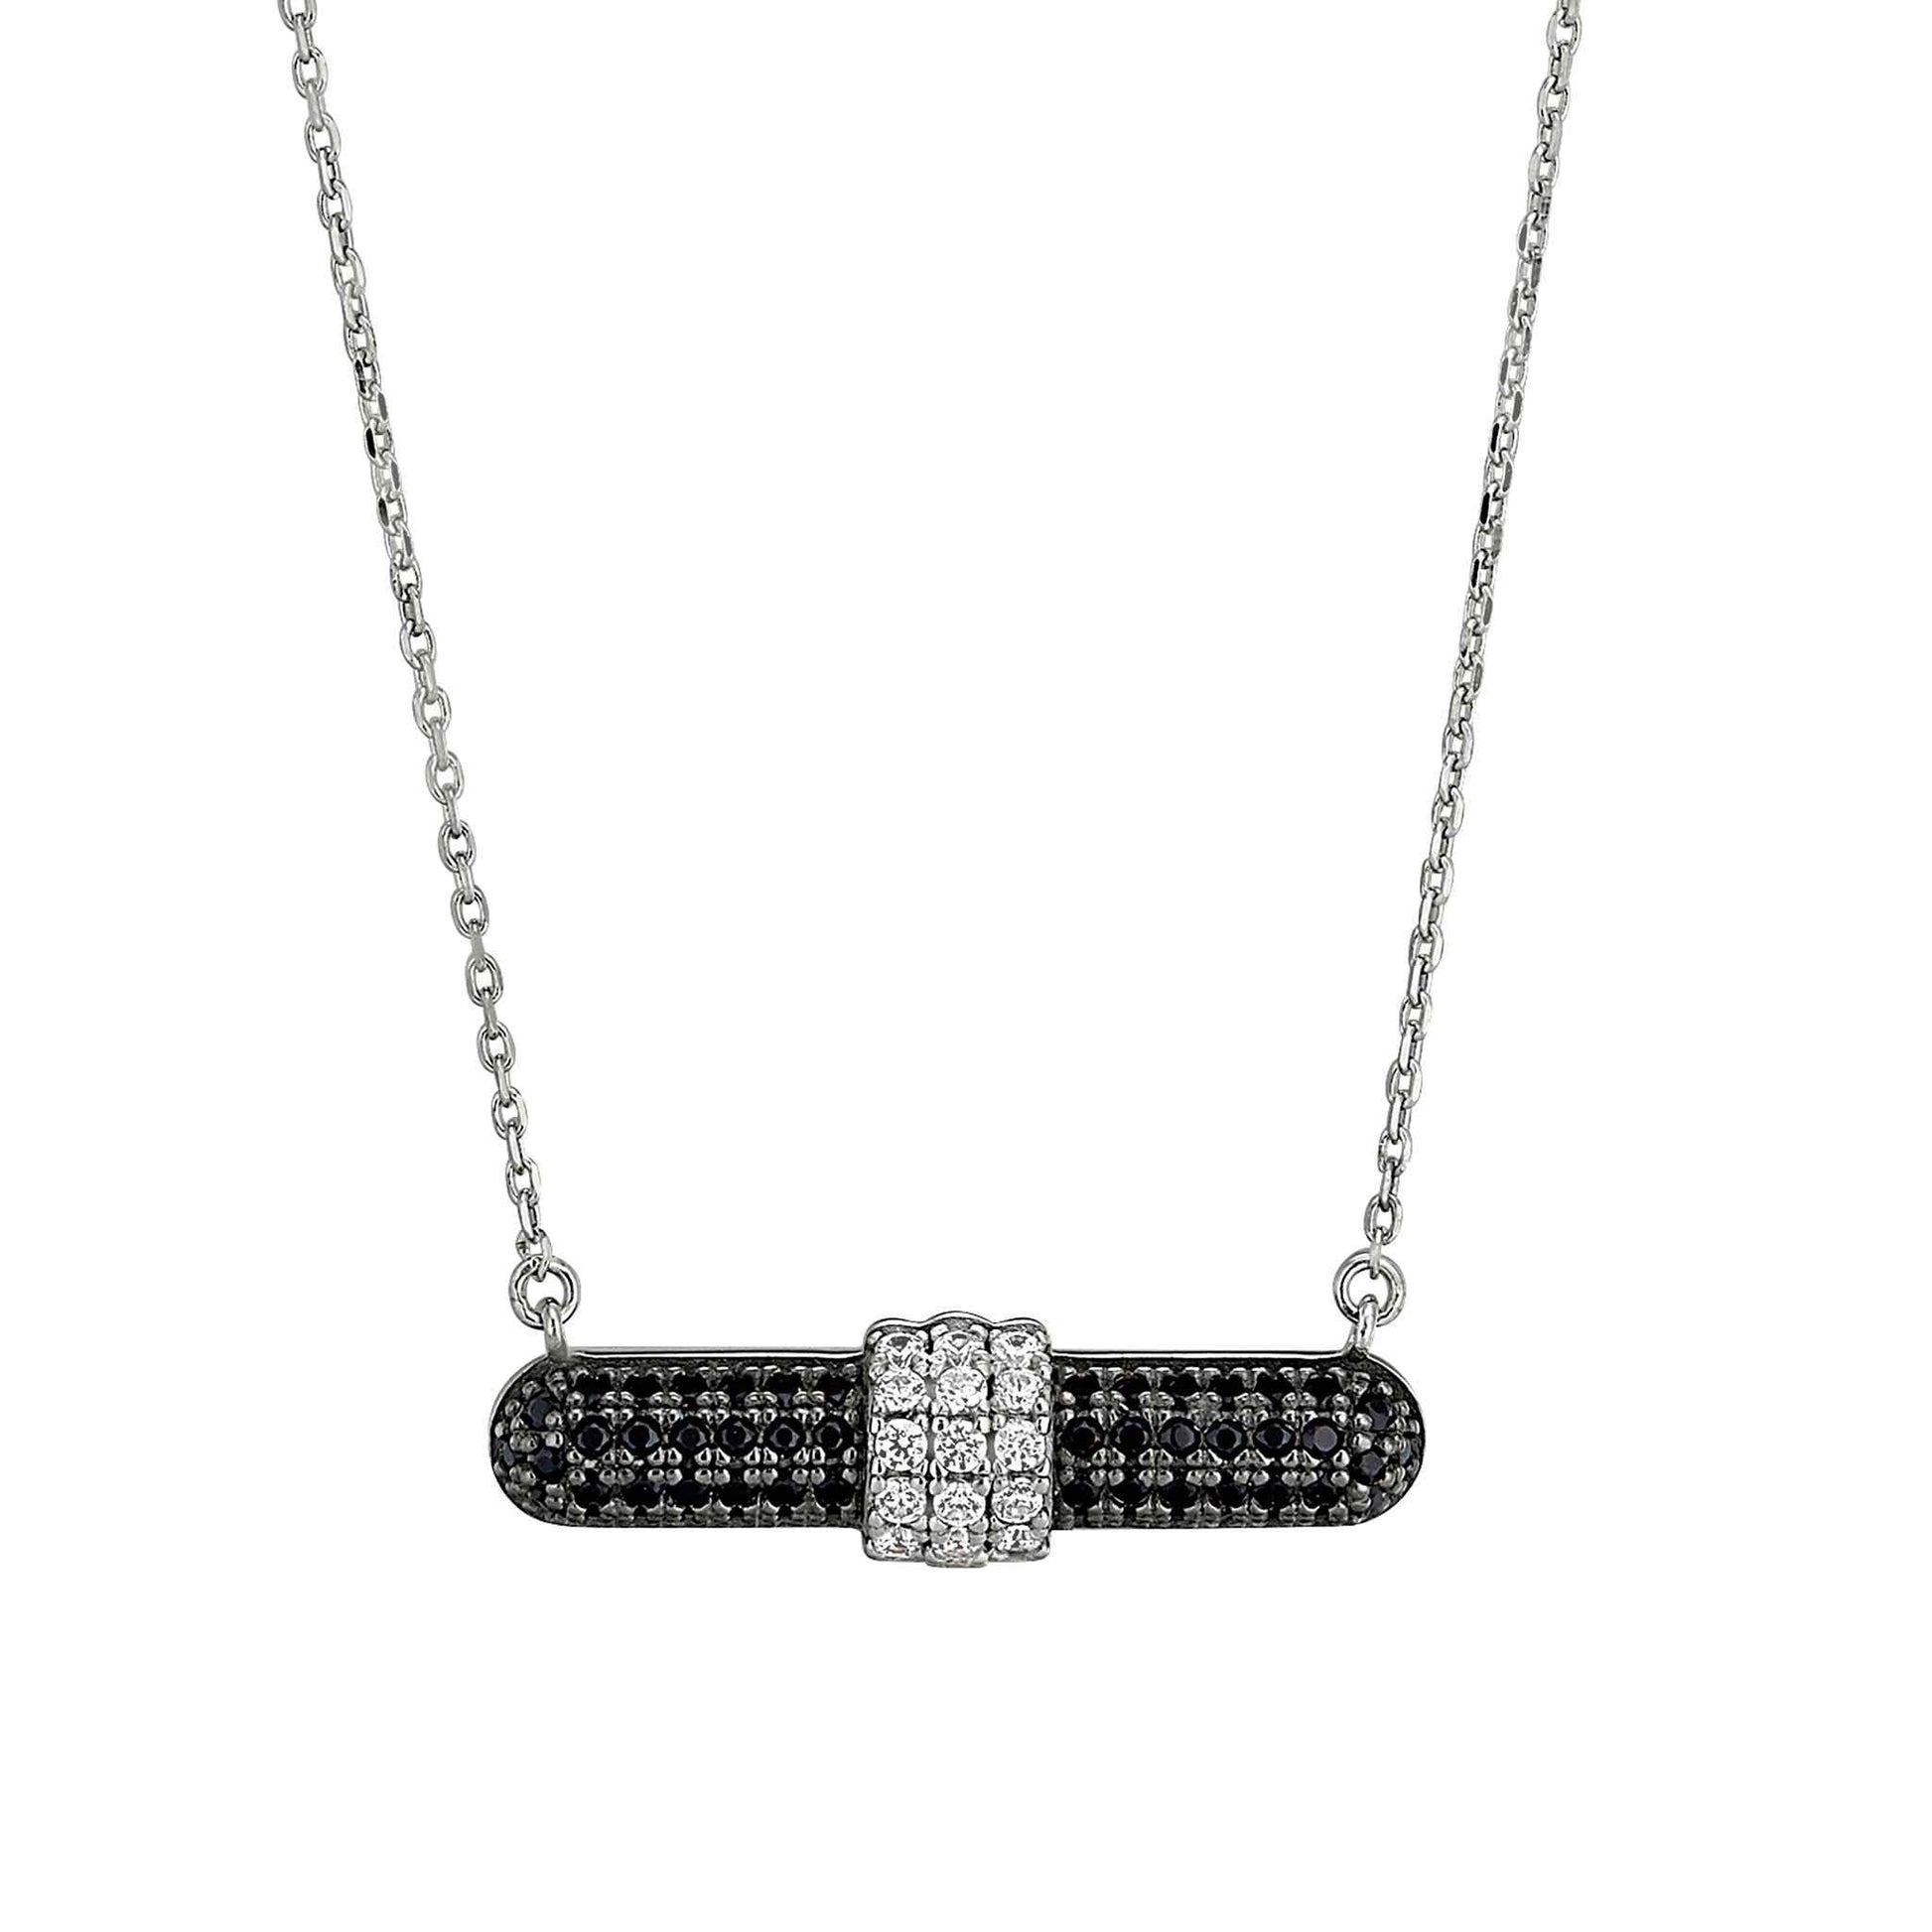 A necklace with black & white simulated diamonds displayed on a neutral white background.